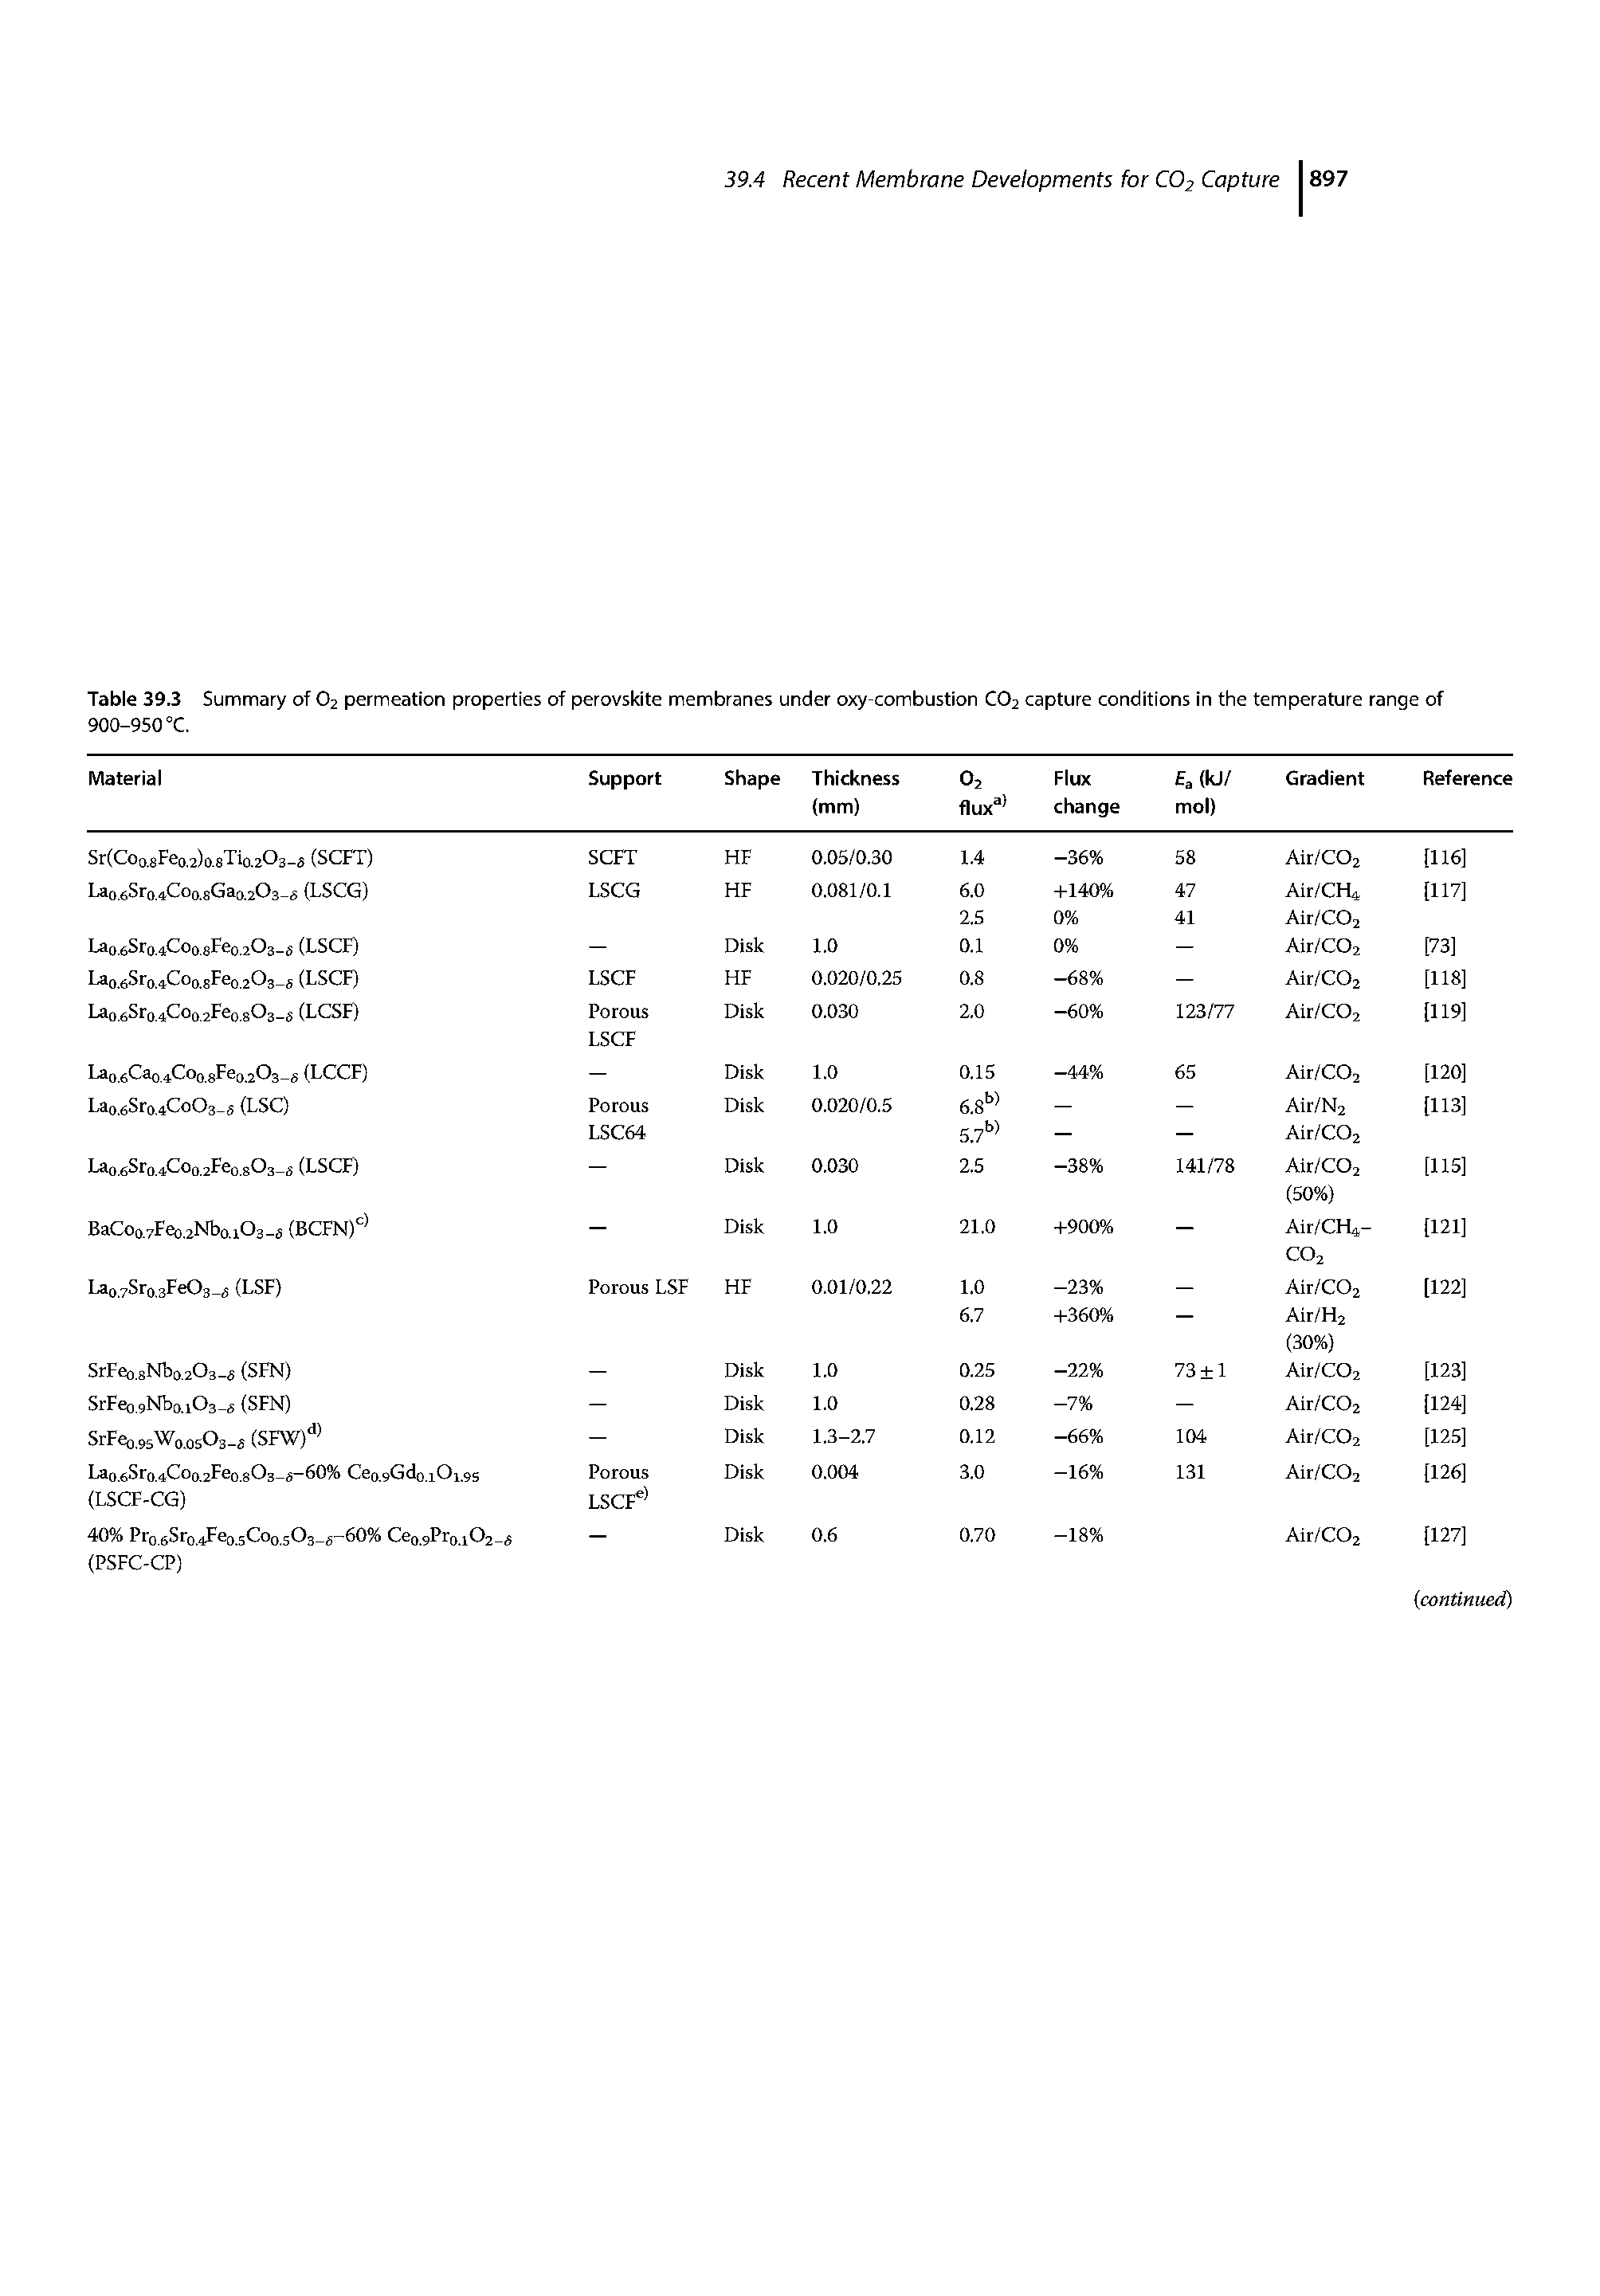 Table 39.3 Summary of O2 permeation properties of perovskite membranes under oxy-combustion CO2 capture conditions in the temperature range of 900-950°C.